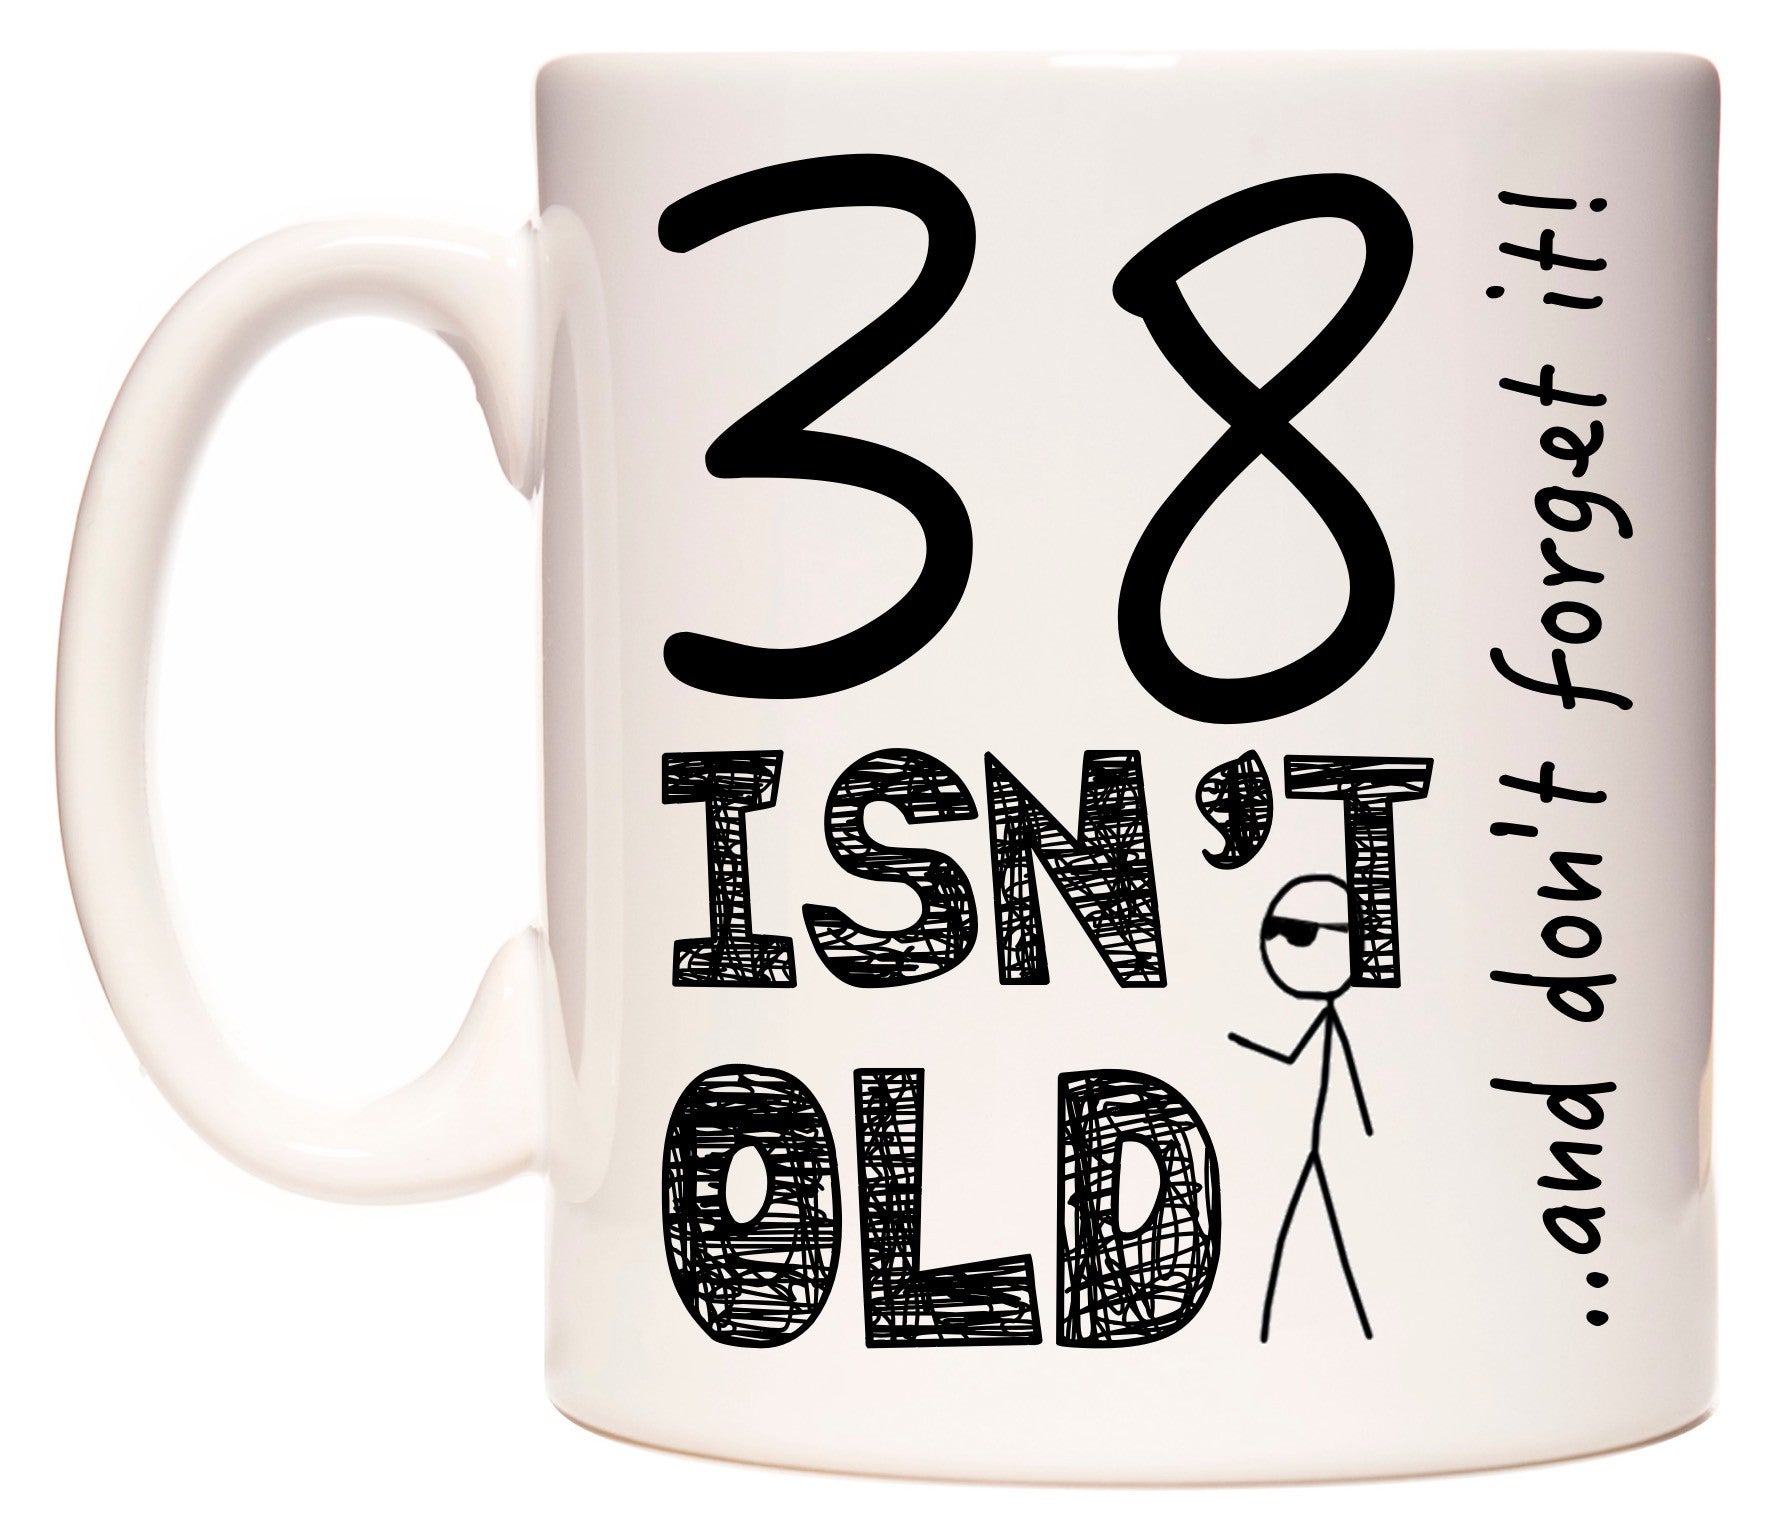 This mug features 38 Isn't Old